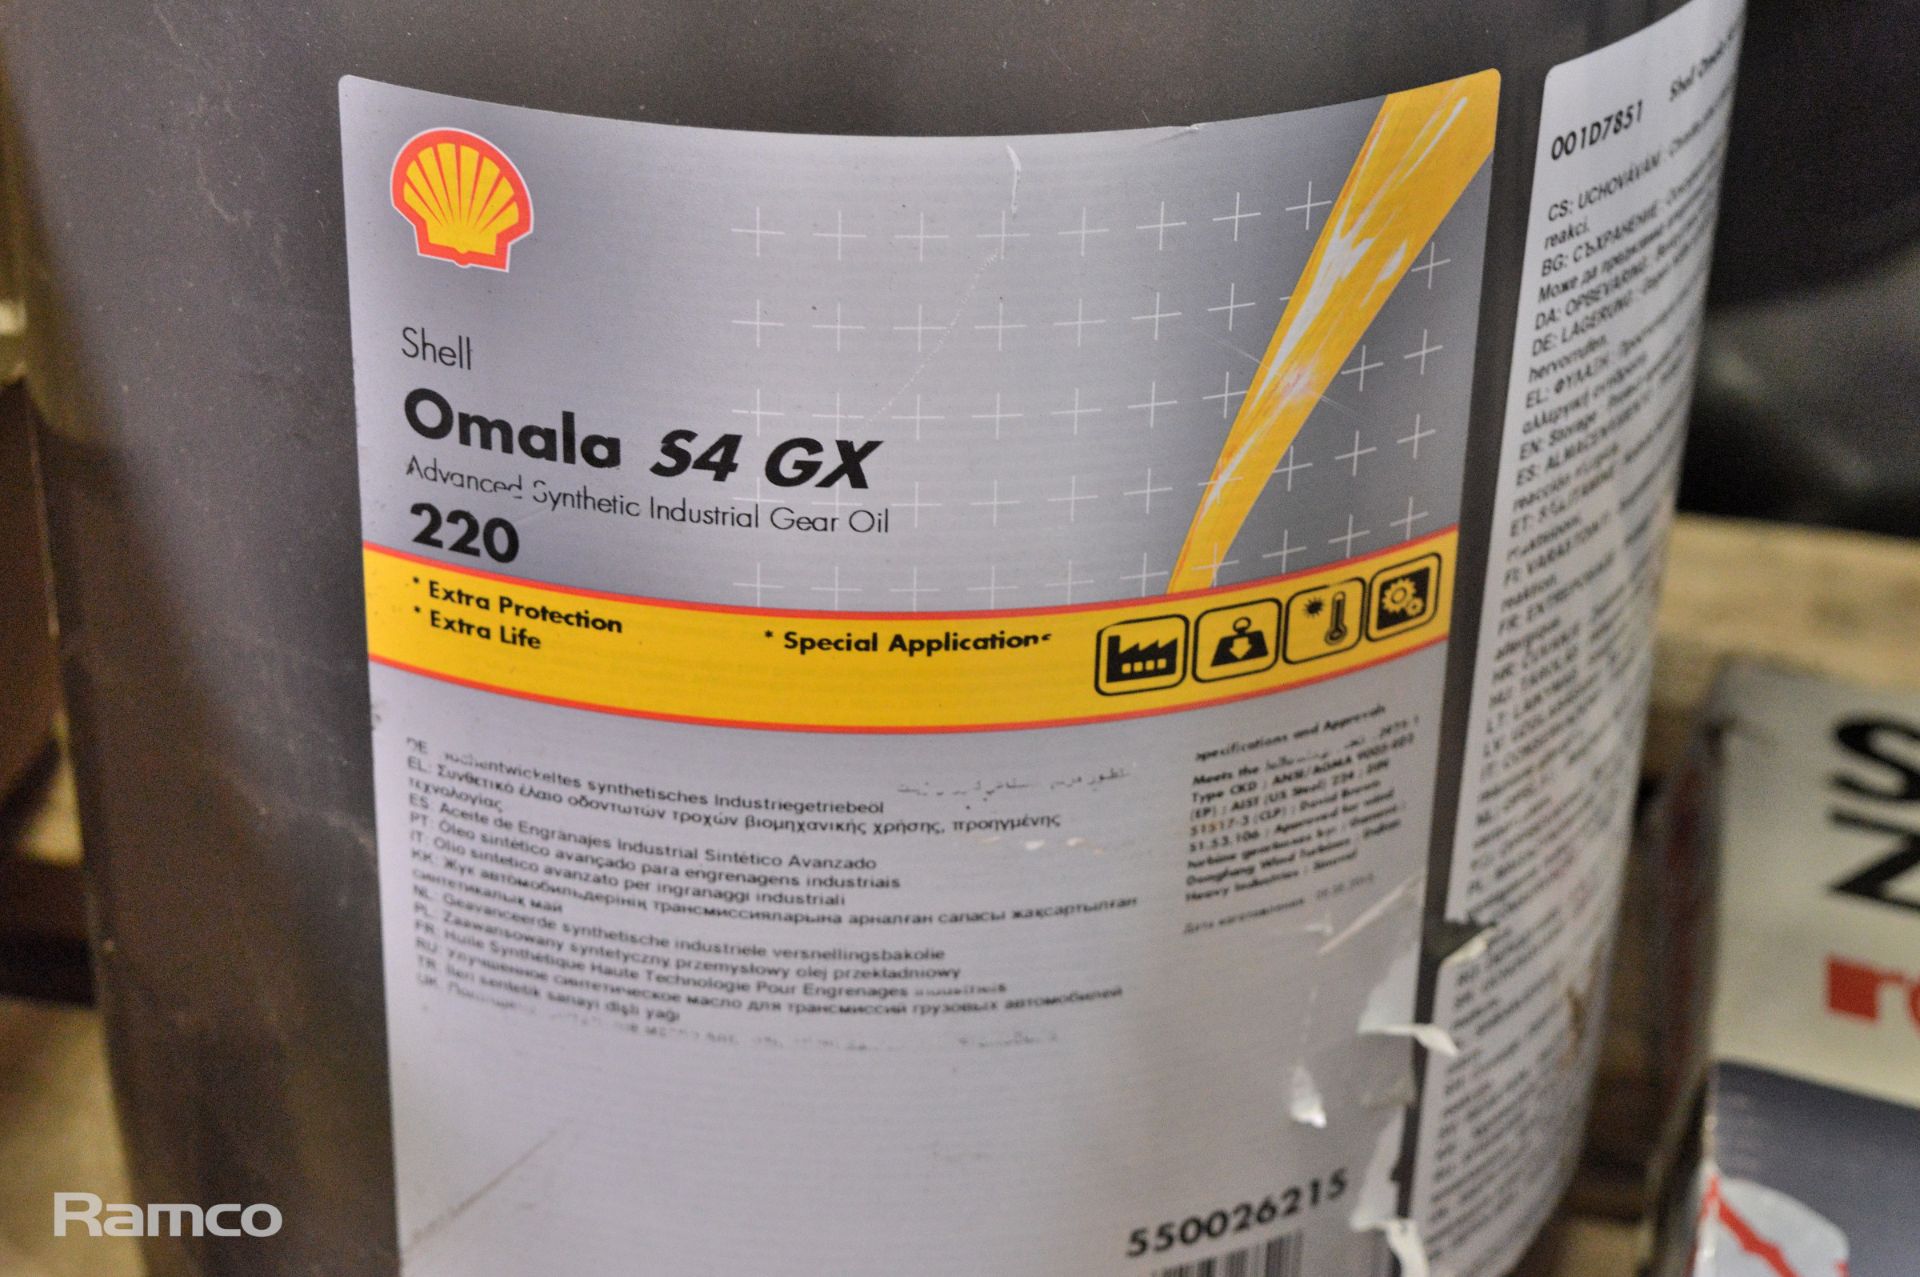 Shell Omala S4 GX 220 synthetic industrial gear oil - Image 2 of 2